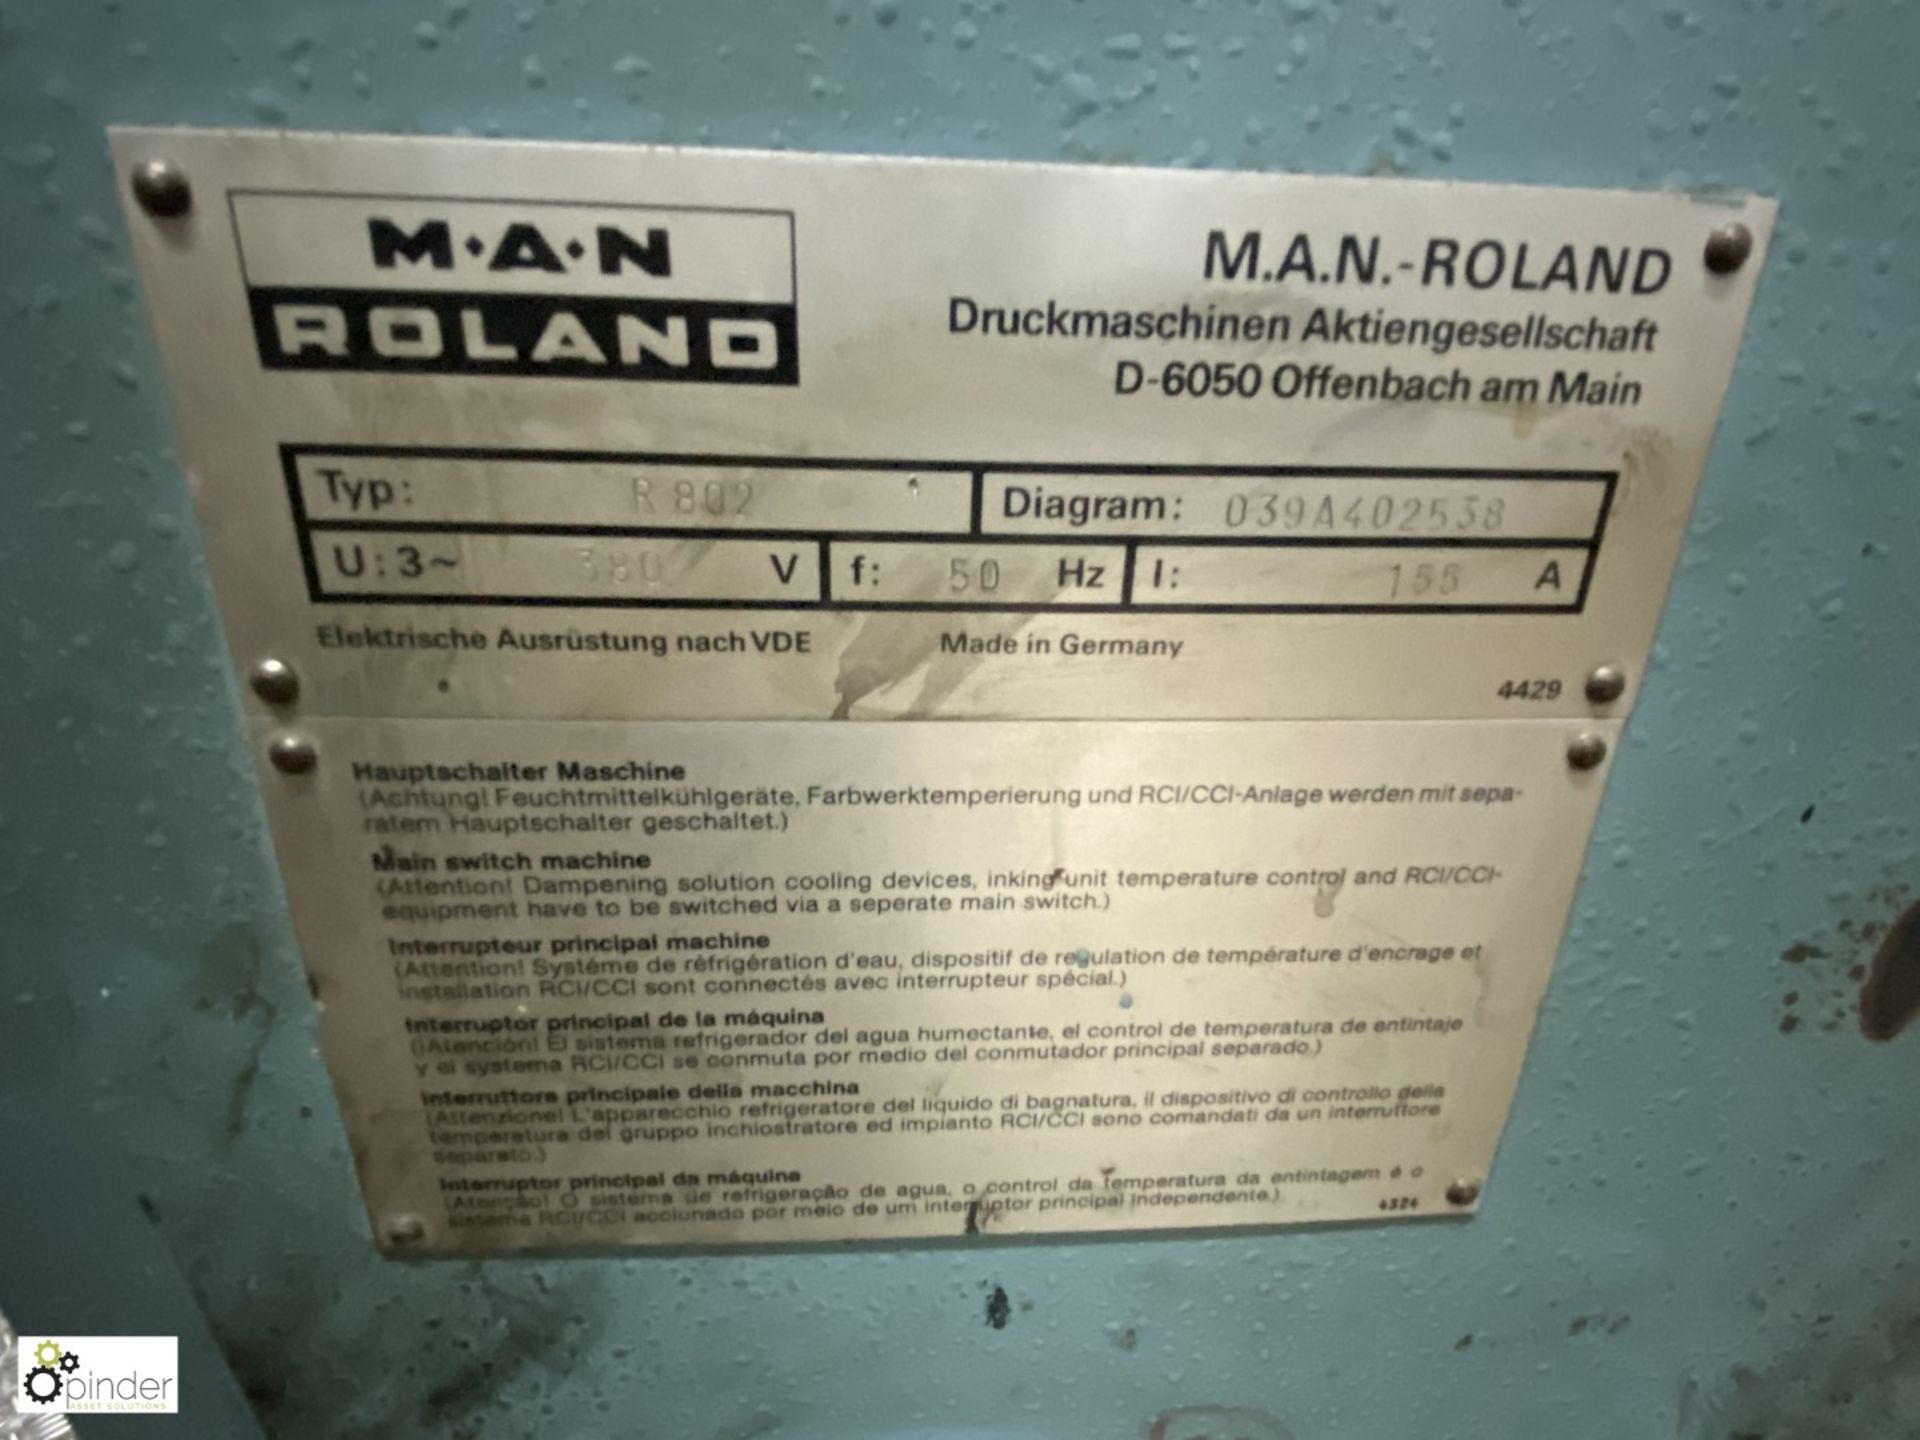 Man Roland 802 7 Series 826 2-colour Press, year 1981, serial number 11217B, max sheet size 1115mm x - Image 17 of 18